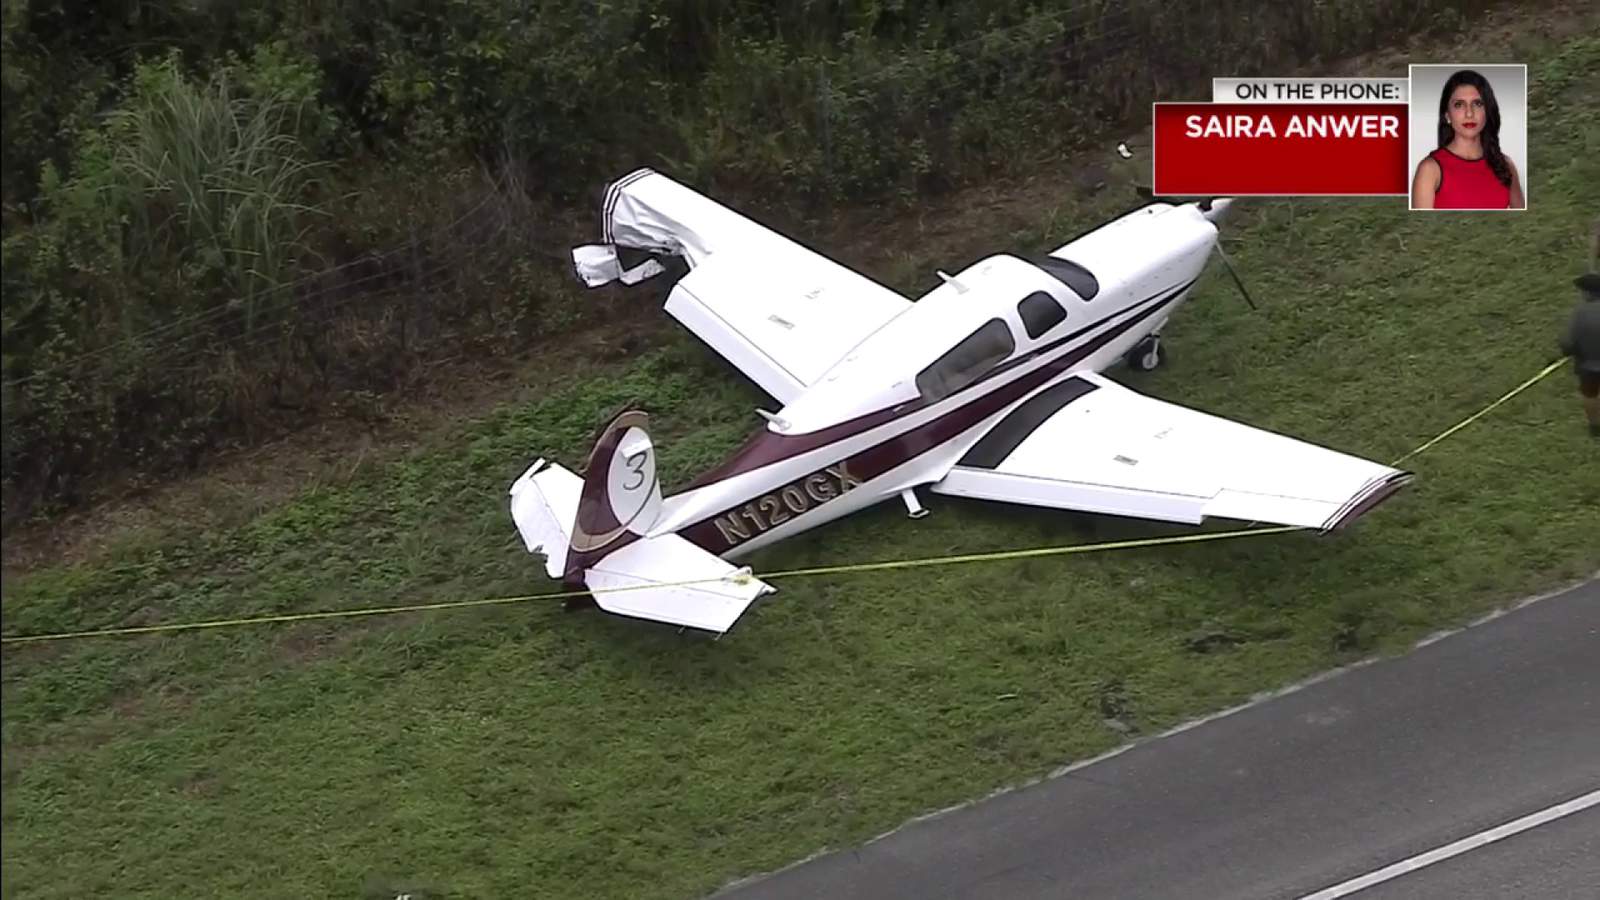 Truck clips wing of airplane making emergency landing on Alligator Alley in Florida